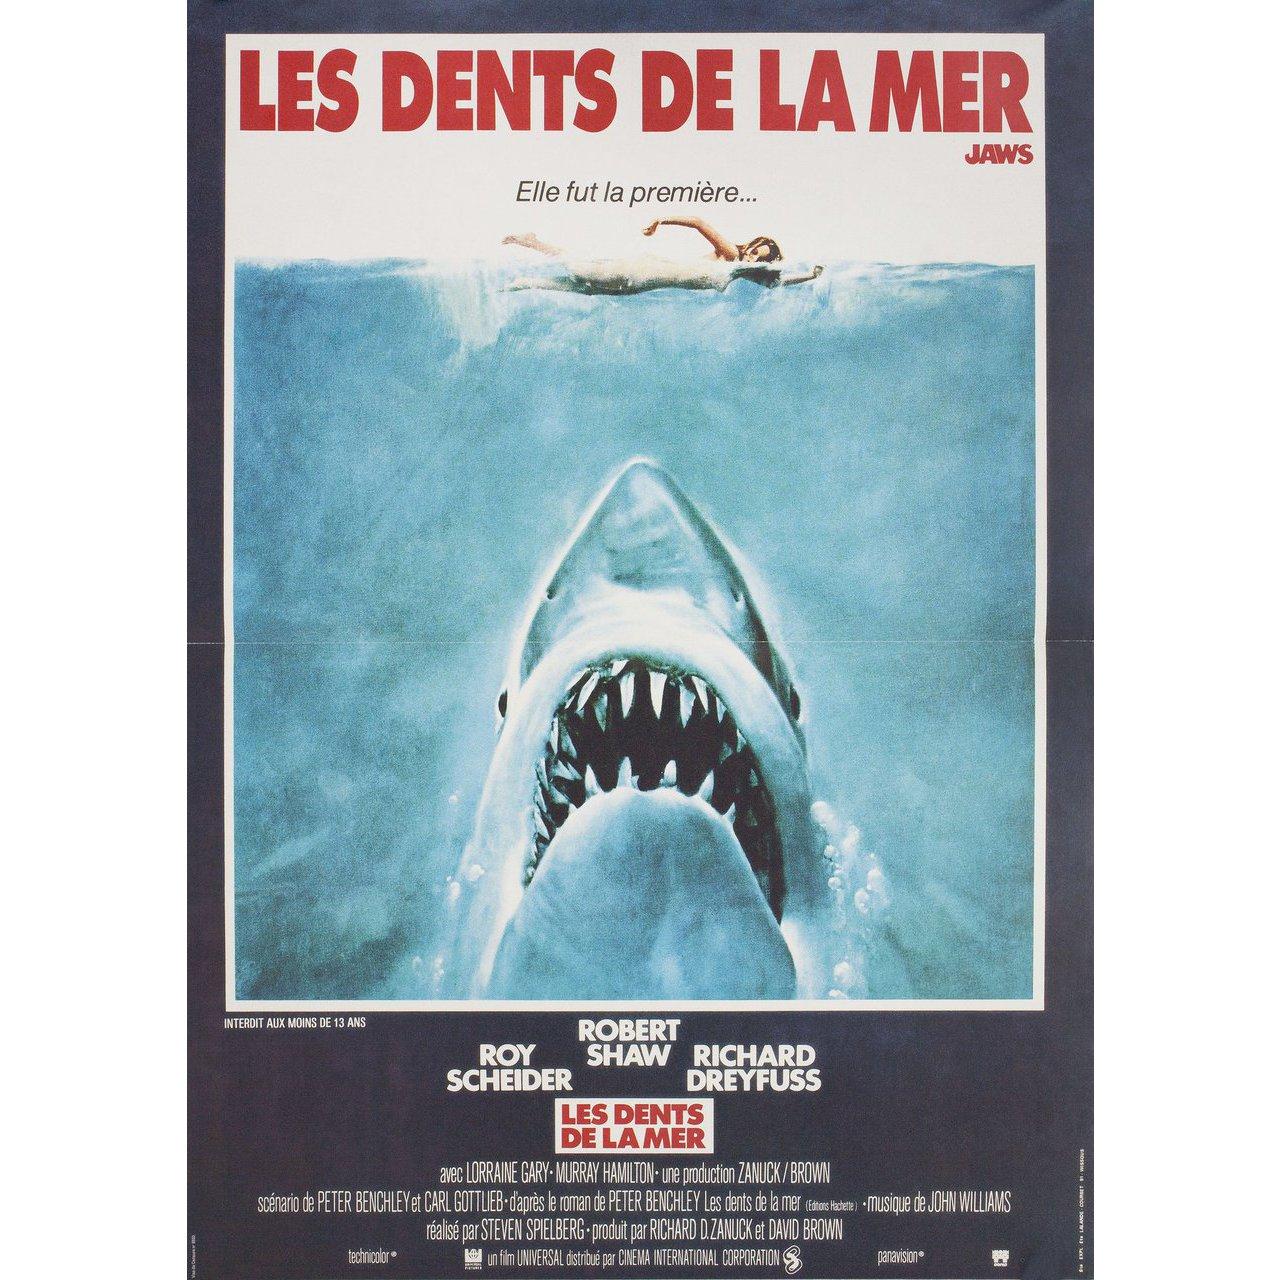 Original 1989 re-release French petite poster for the 1975 film Jaws directed by Steven Spielberg with Roy Scheider / Robert Shaw / Richard Dreyfuss / Lorraine Gary. Fine condition, folded. Many original posters were issued folded or were